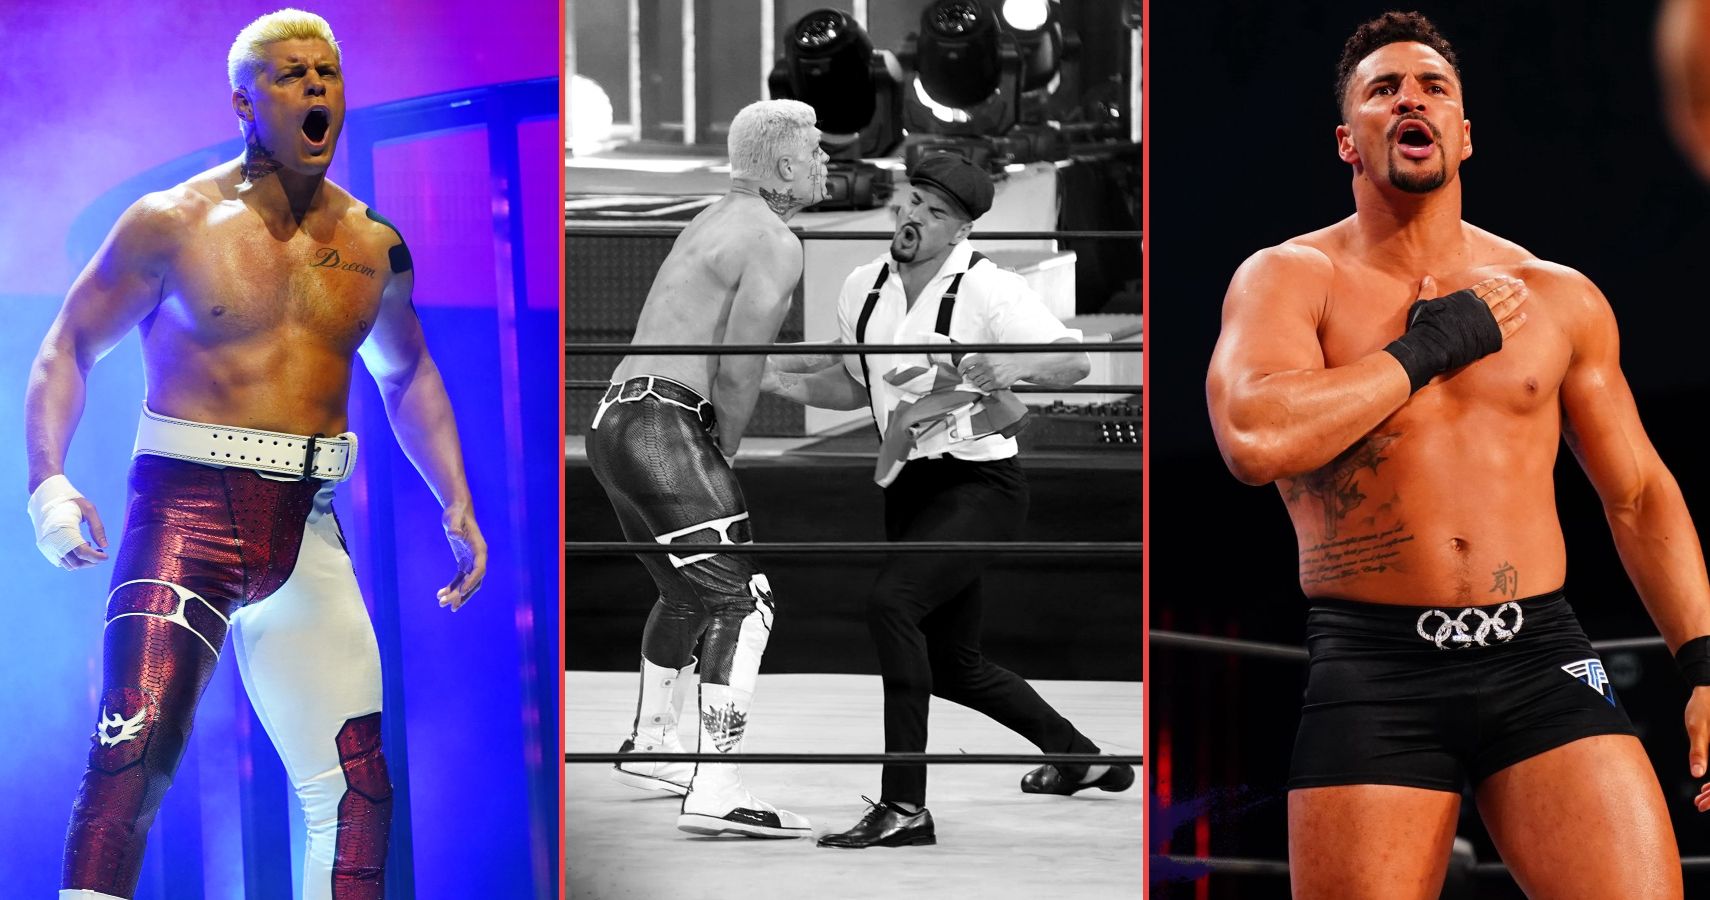 AEW stars Cody Rhodes and Anthony Ogogo feud prior their match at Double or Nothing